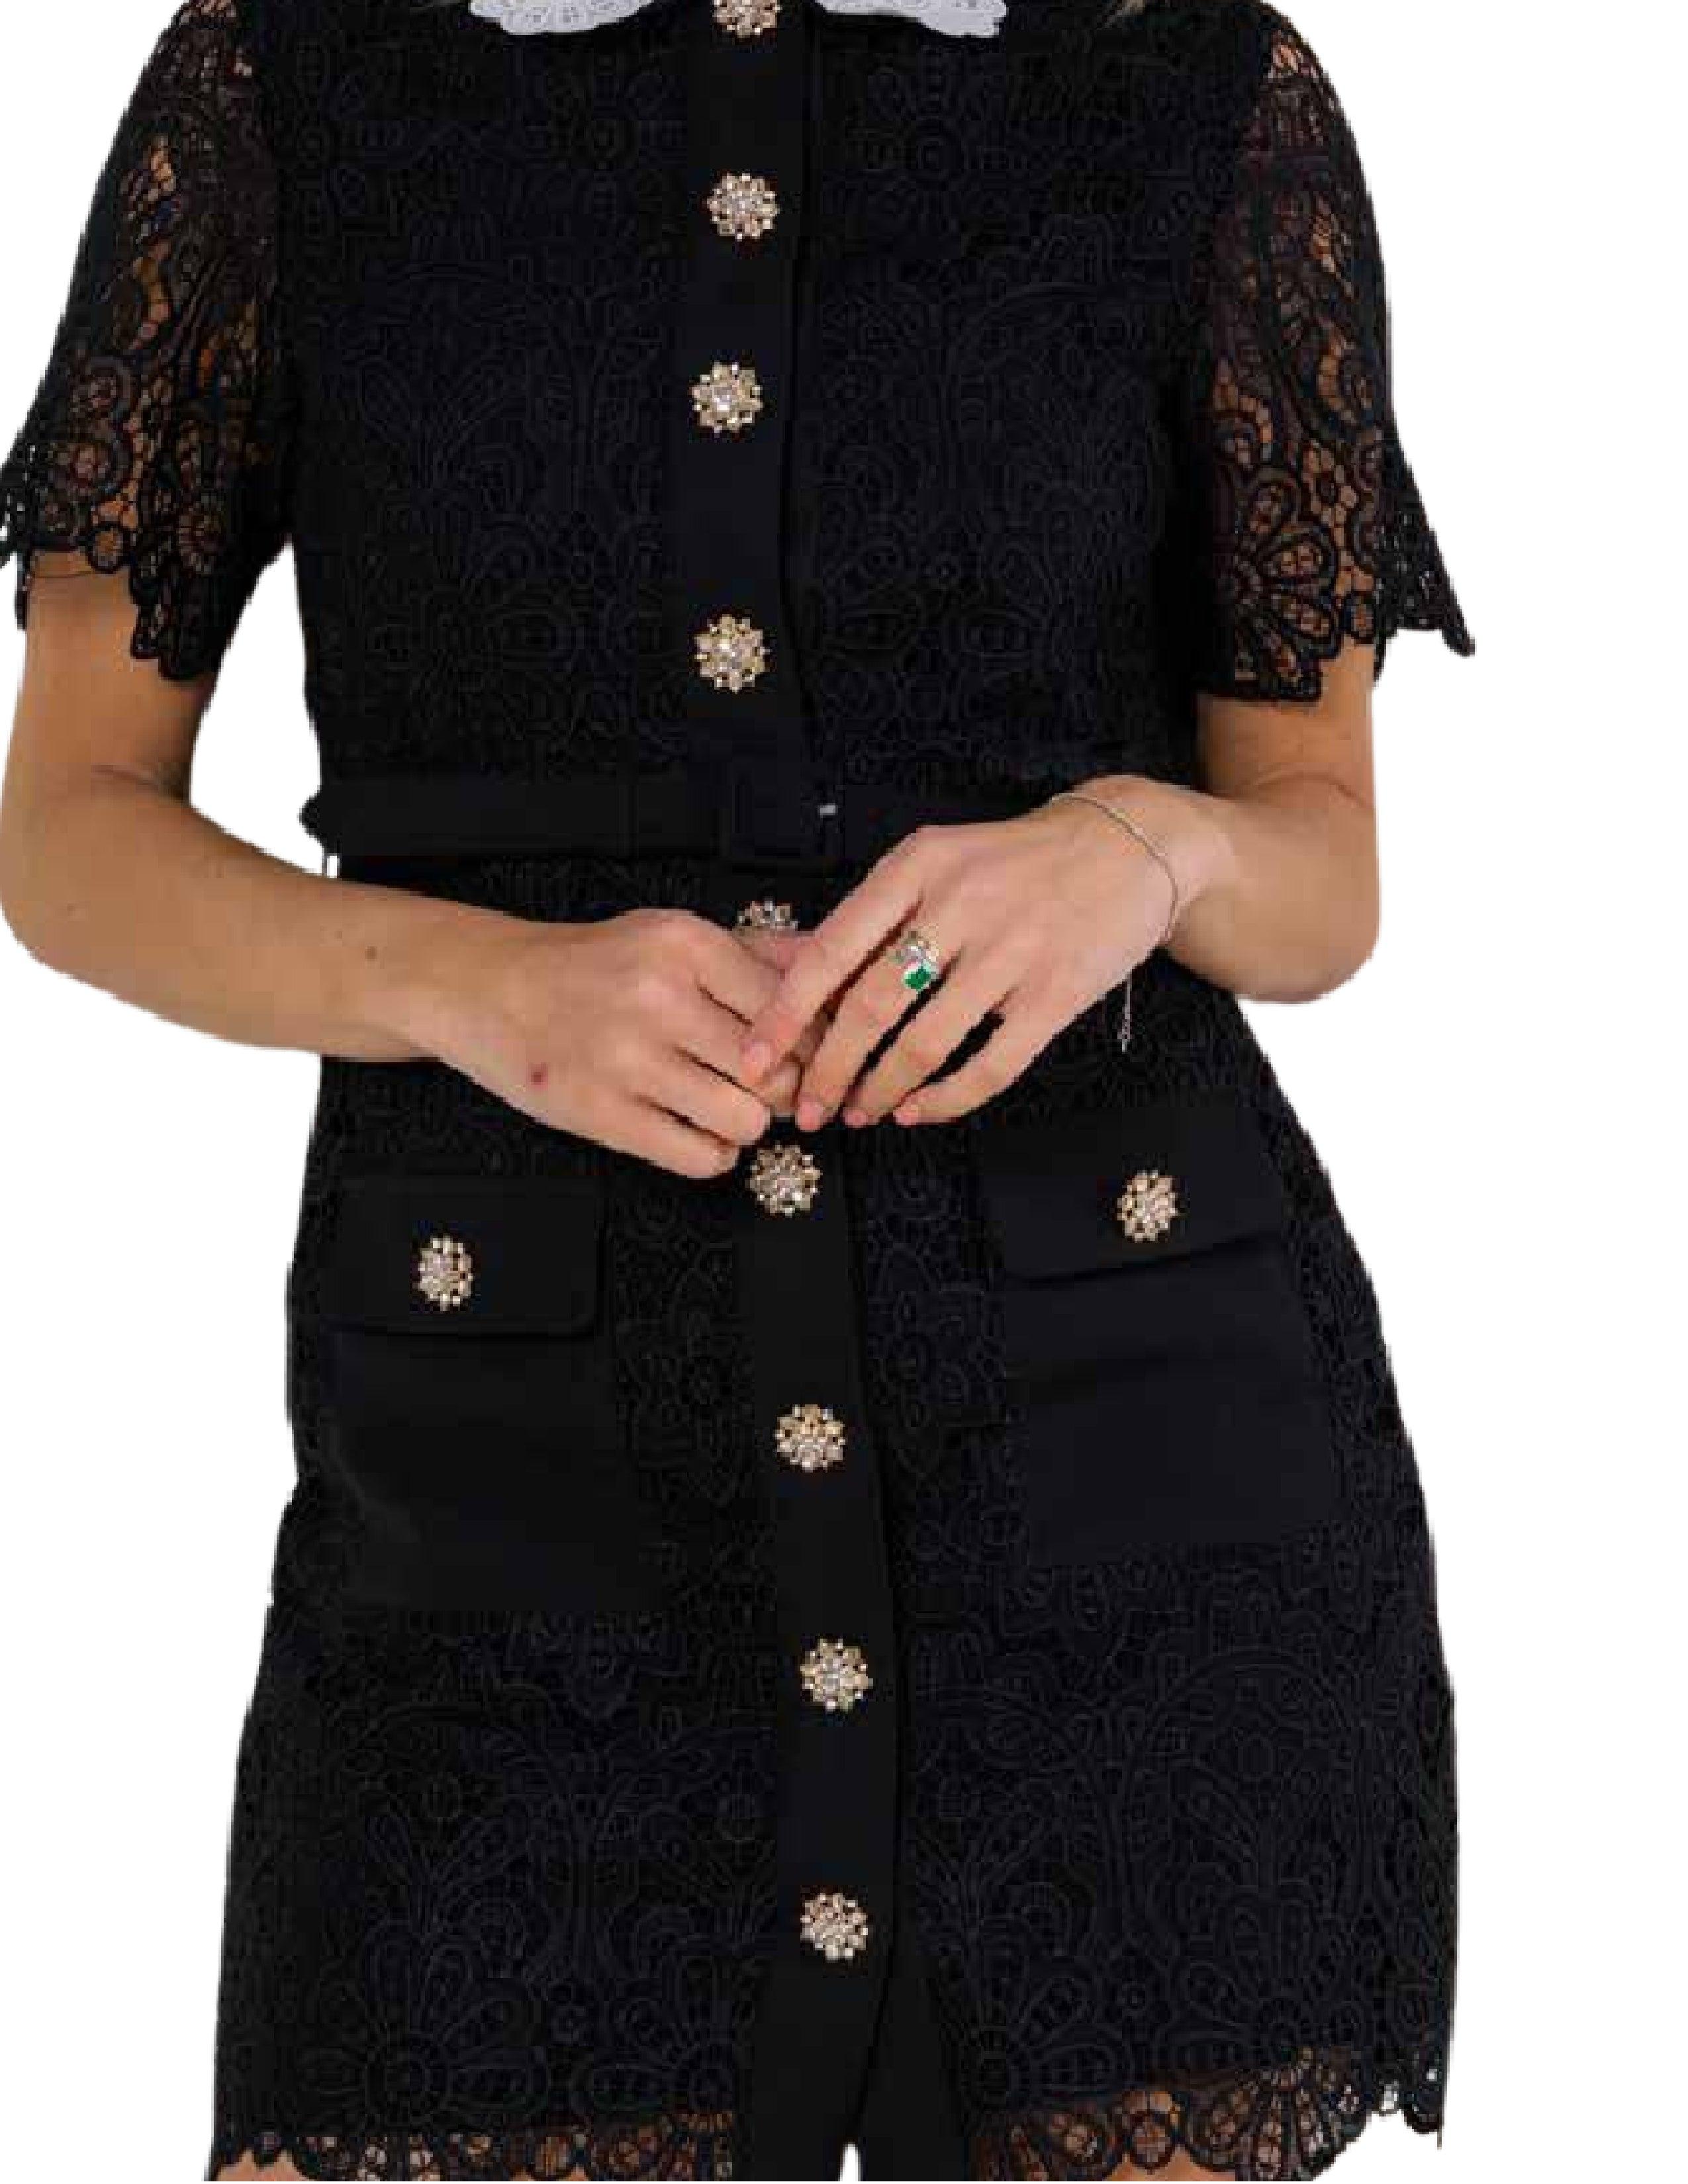 Elegant black lace dress with a distinctive white lace collar, short lace sleeves, and a row of decorative buttons down the front, displayed on a hanger  - BTK COLLECTION